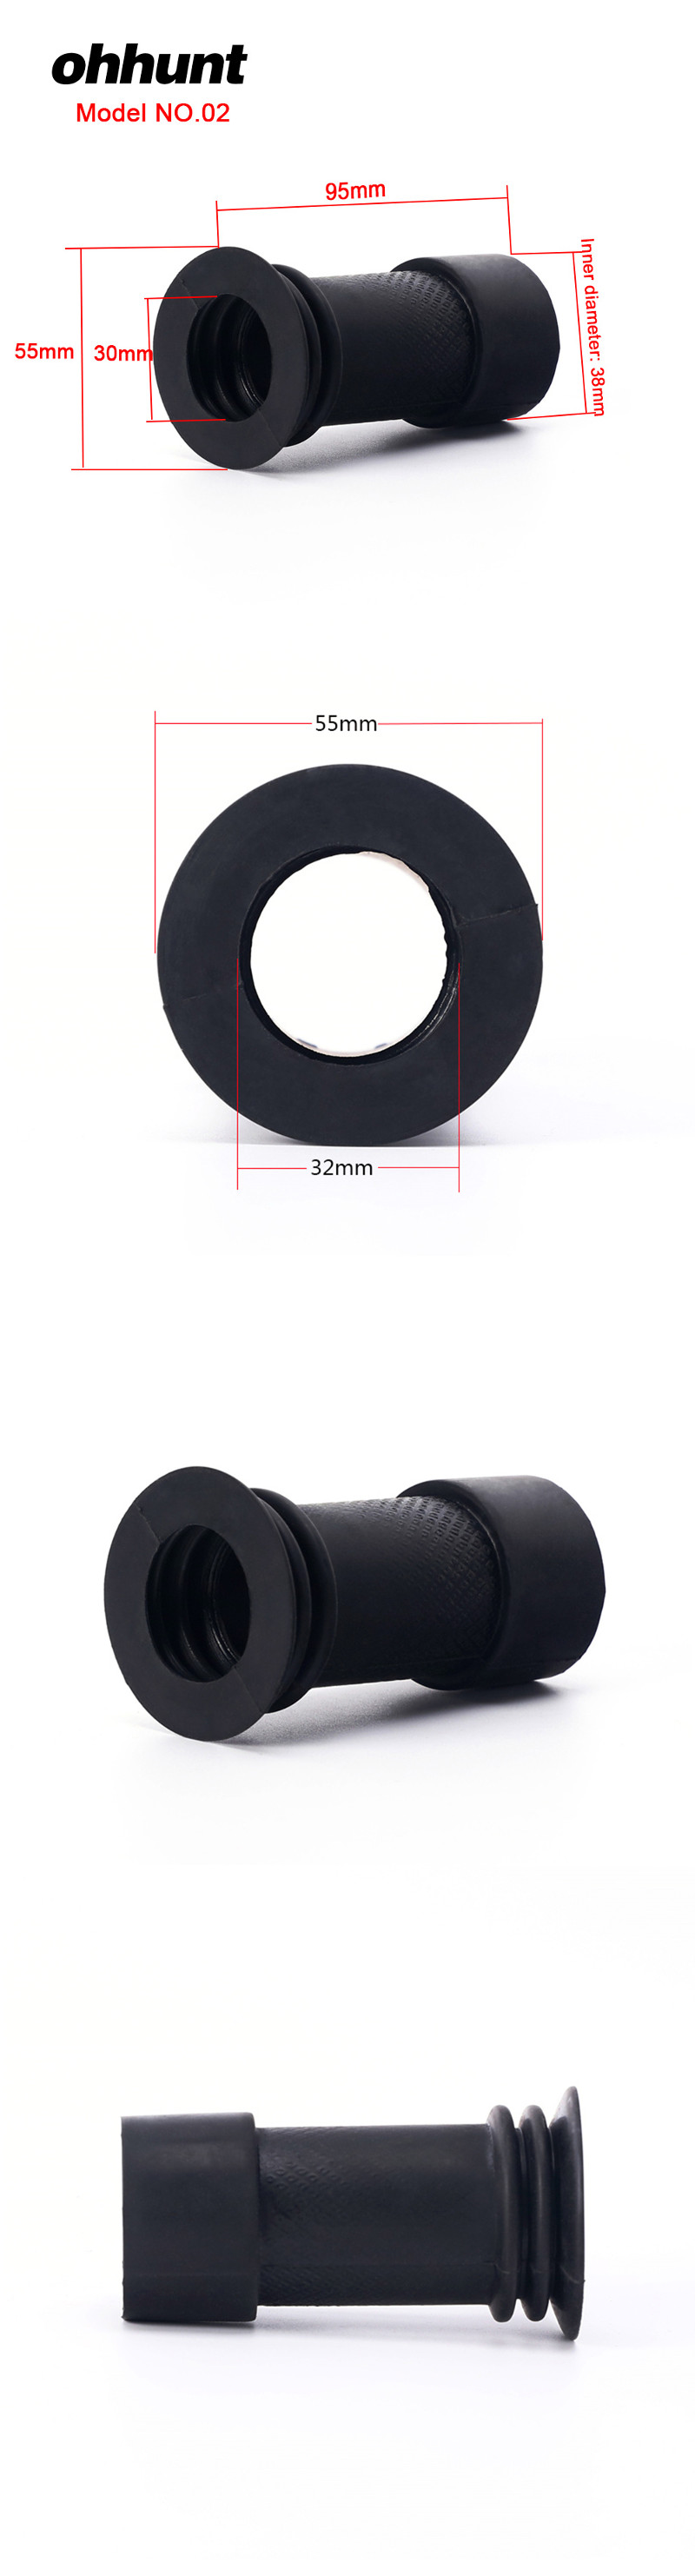 ohhunt-Hunting-Riflescope-Lens-Rubber-Eyeshade-4-Types-Tactical-Optics-Sight-Eye-Protector-Cover-Sca-1535611-2